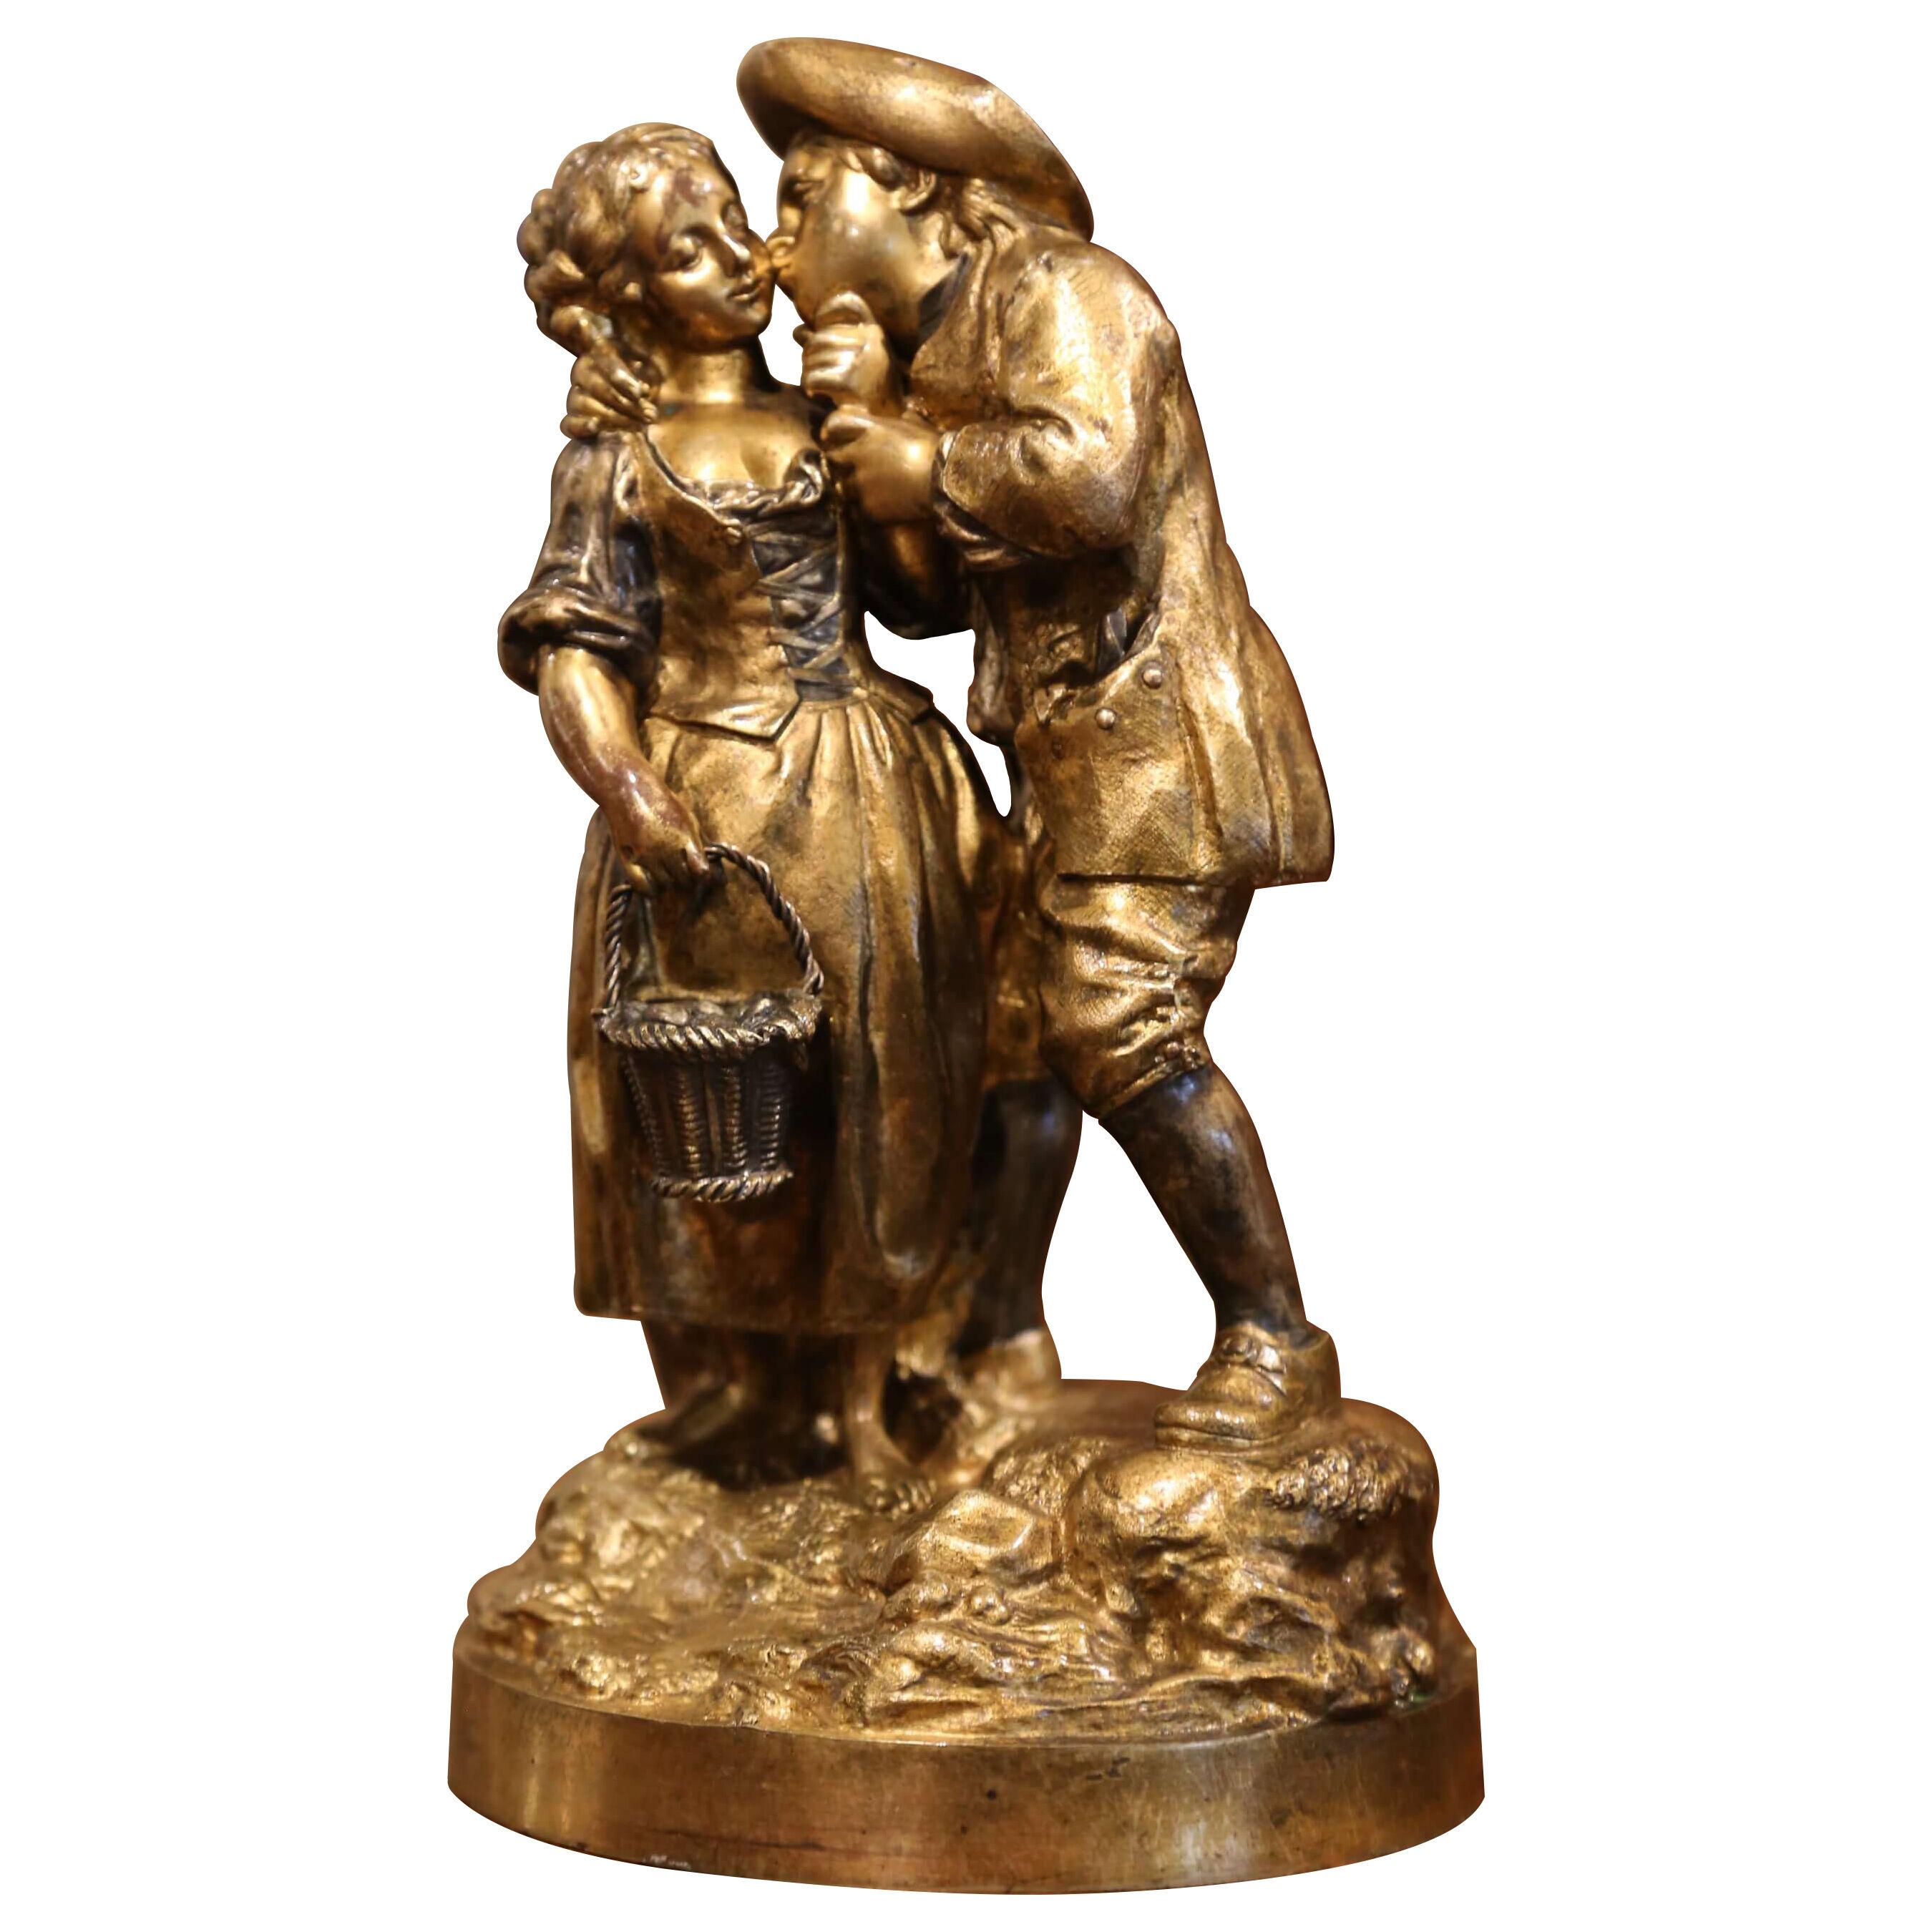 Mid-19th Century French Patinated Bronze Sculpture Composition "The Kiss"